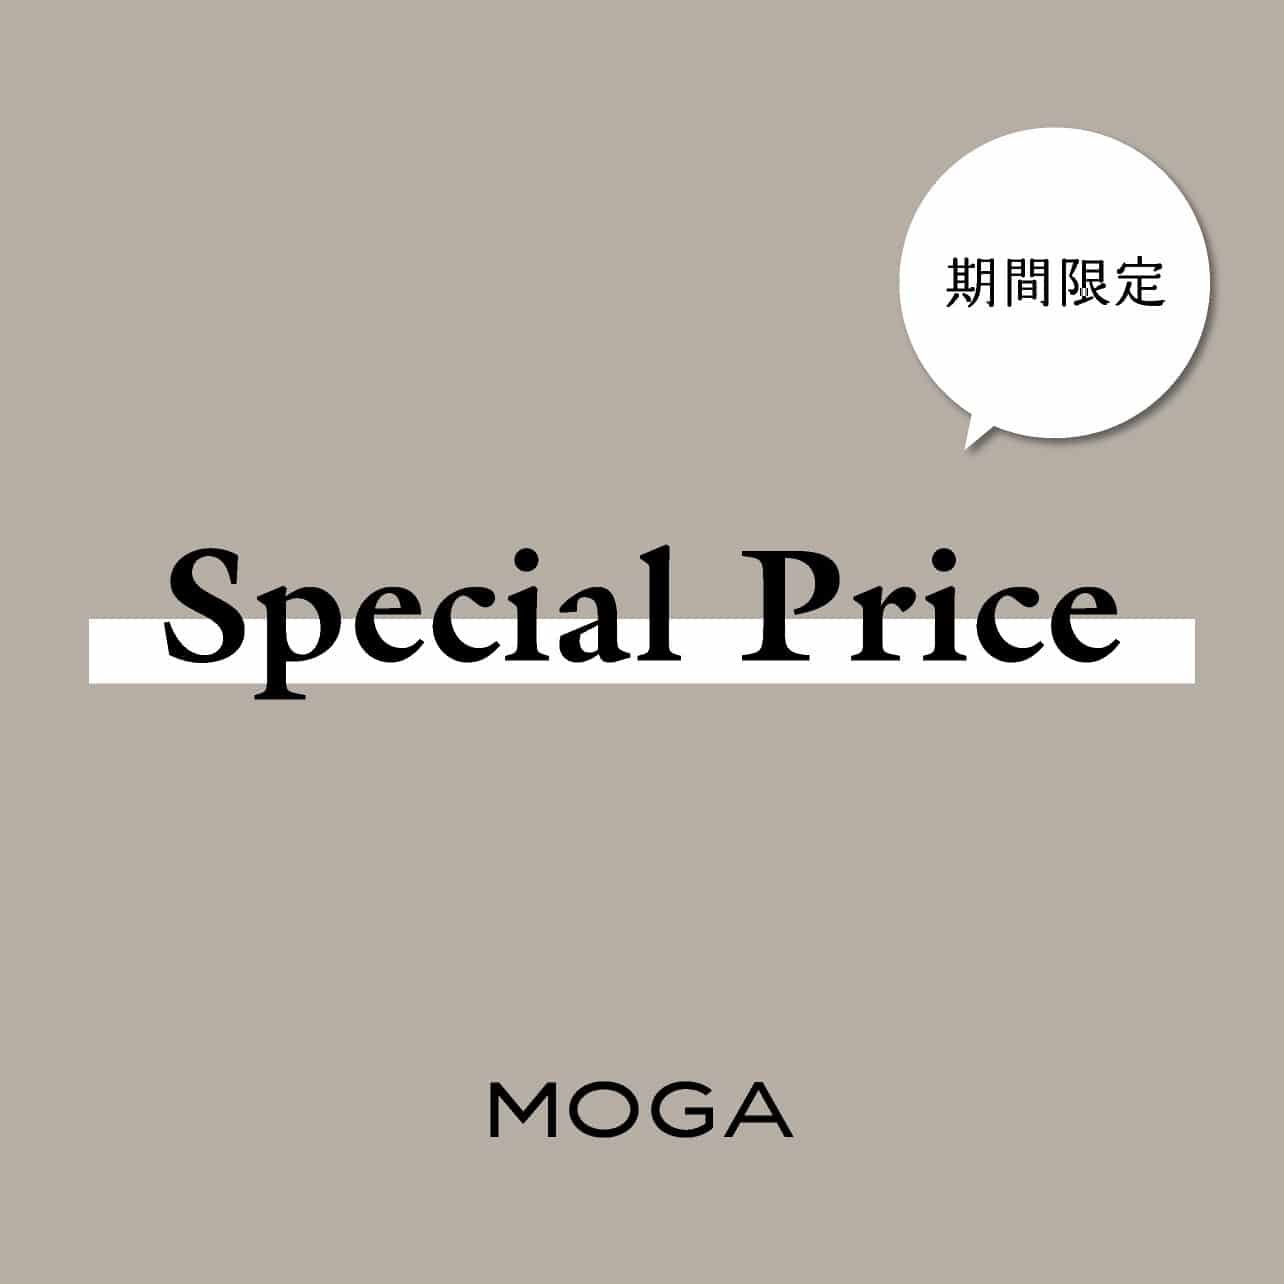 Special Price Campaign